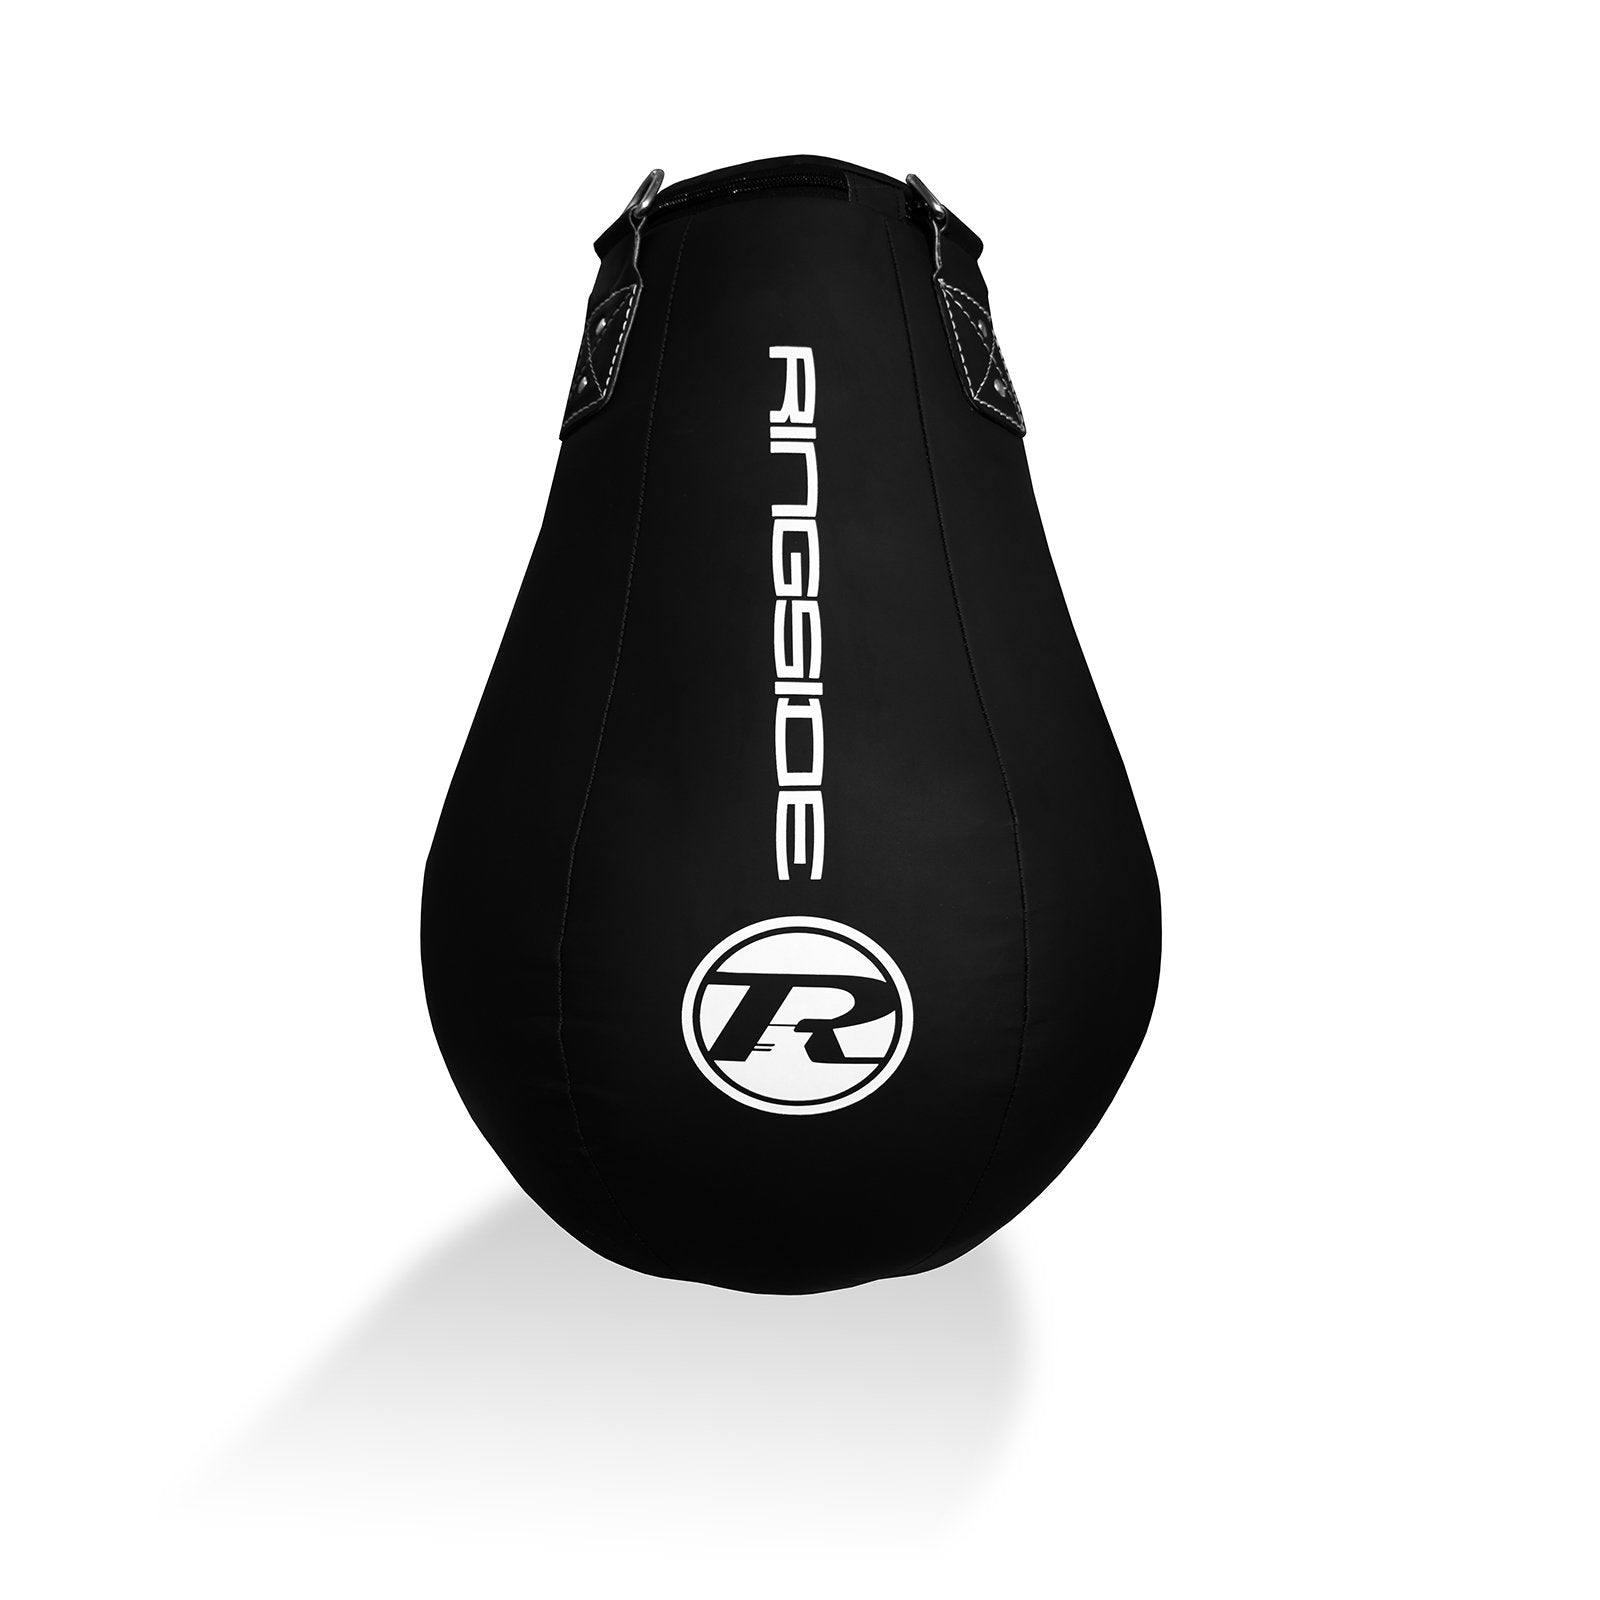 Synthetic Leather G1 Mirage Maize Punch Bag Black / White